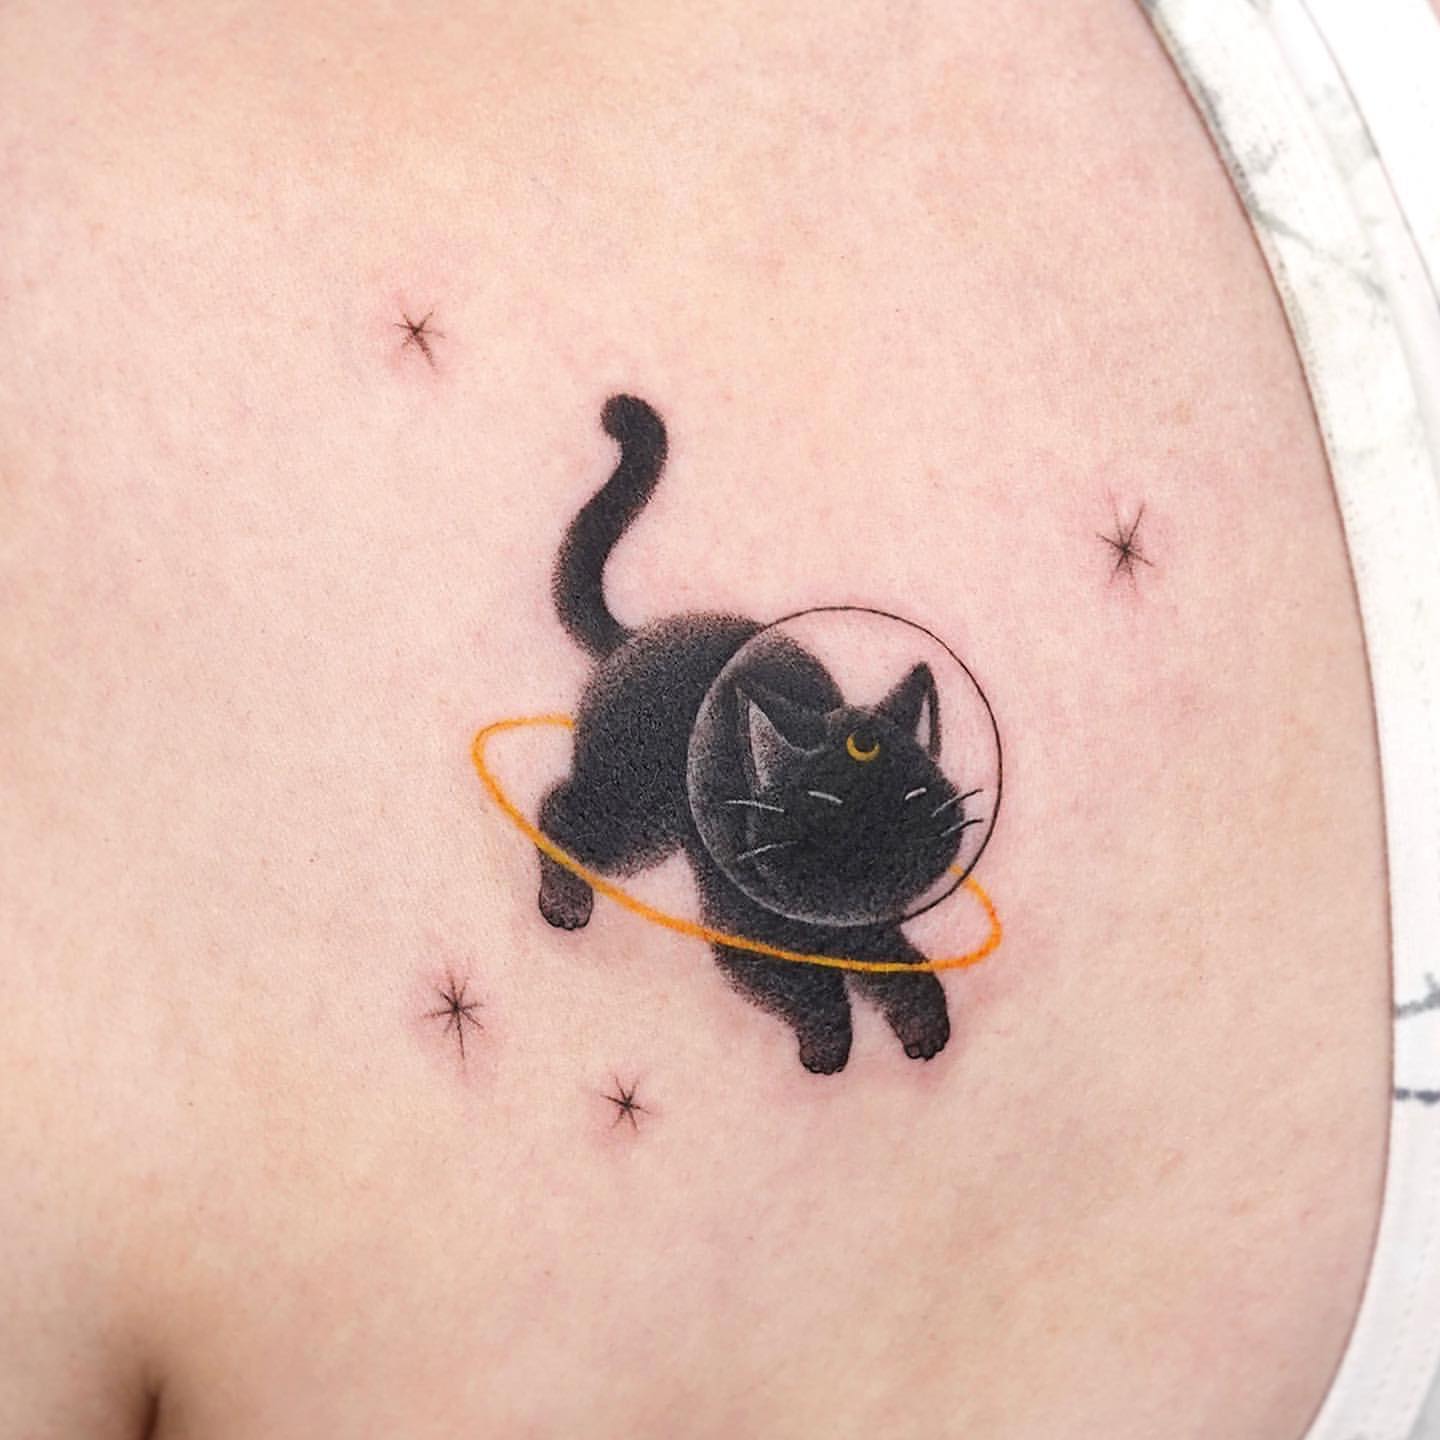 50+ Best Black Cat Tattoo Design Ideas (Meaning and Inspirations) | Black  cat tattoos, Cat tattoo designs, Cat silhouette tattoos